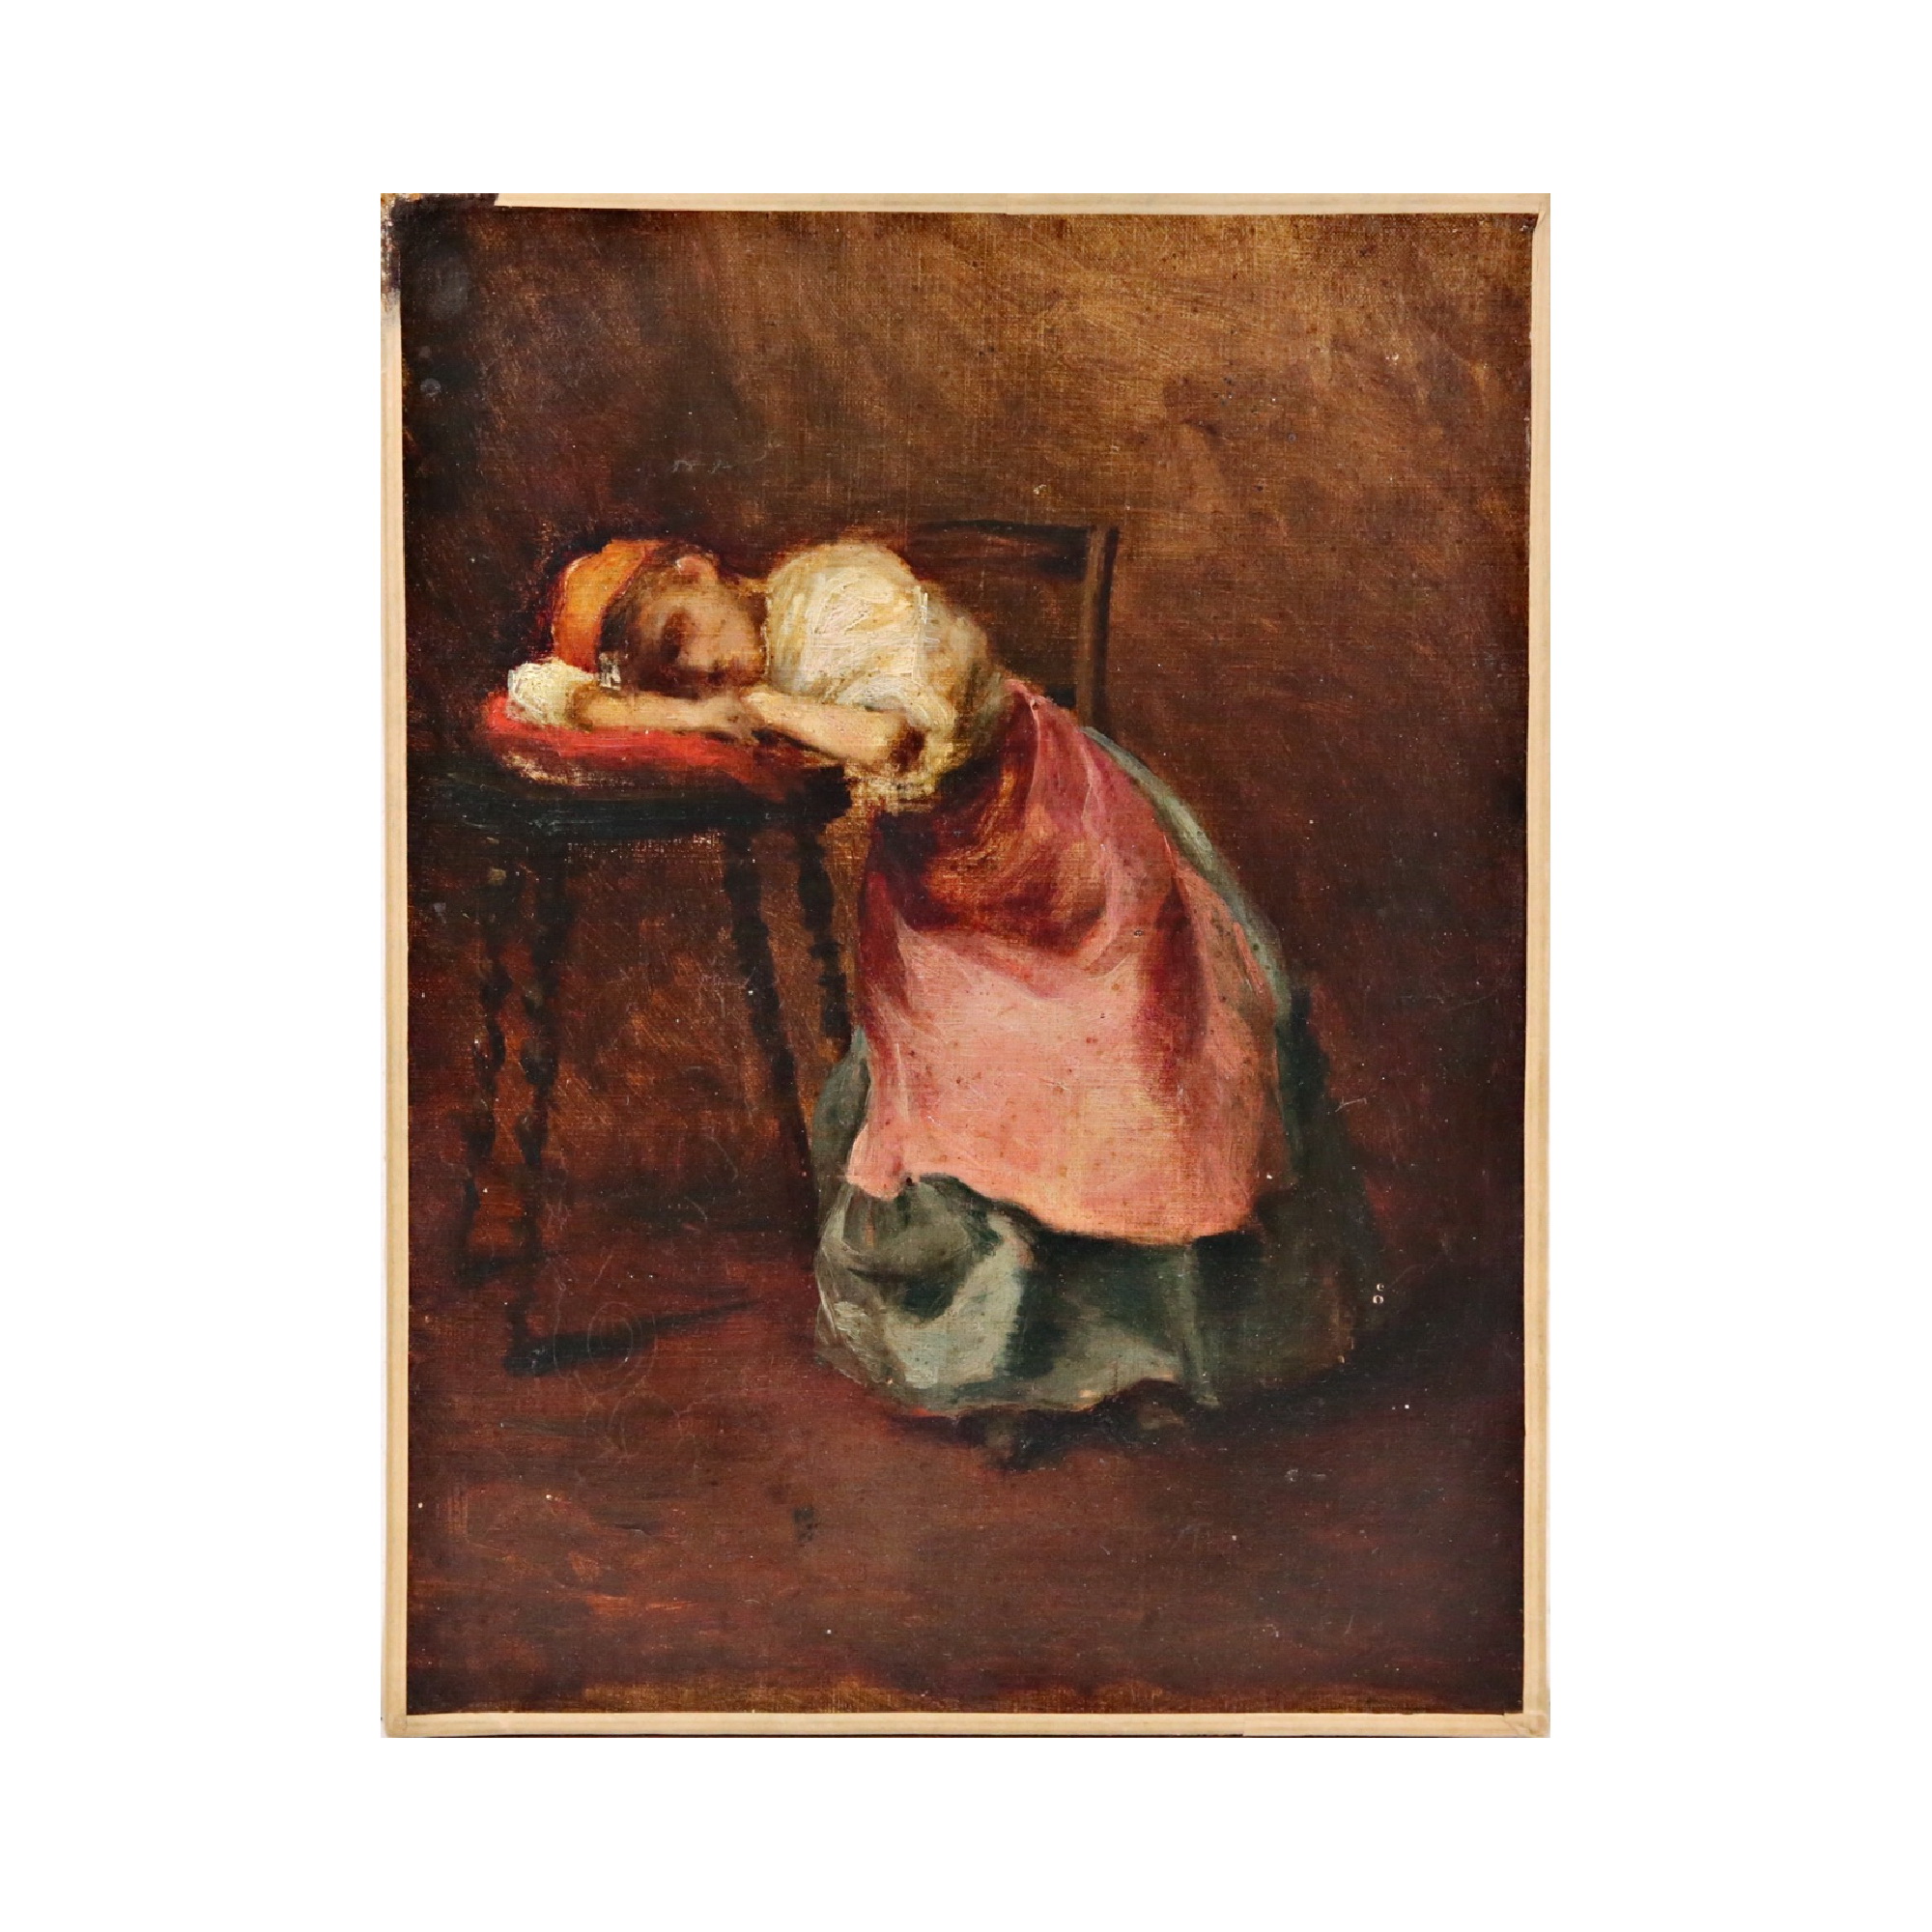 "The Maid dozing in stool", oil on canvas, unsigned, French painting of the 19th C